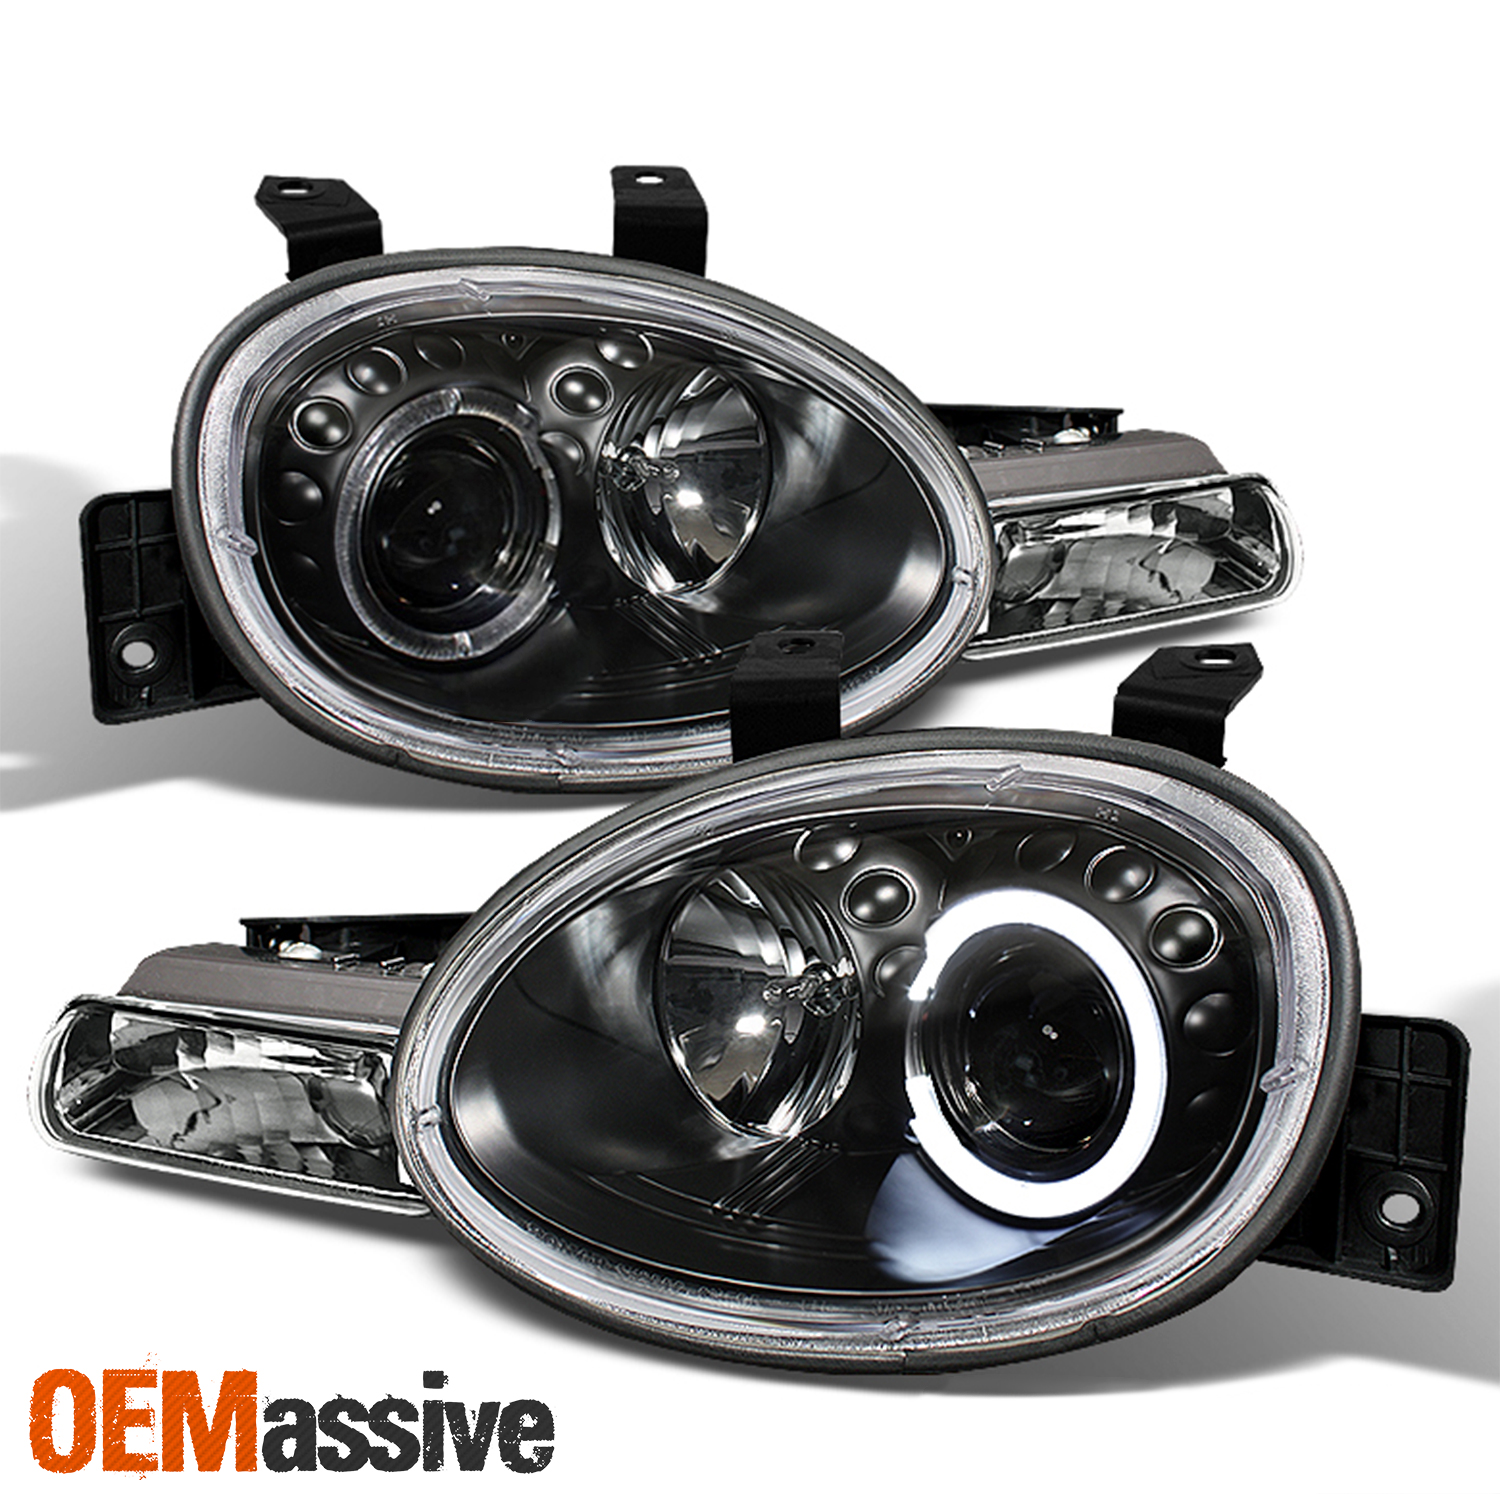 For 9599 Dodge Neon & Plymouth Neon LED Halo Projector